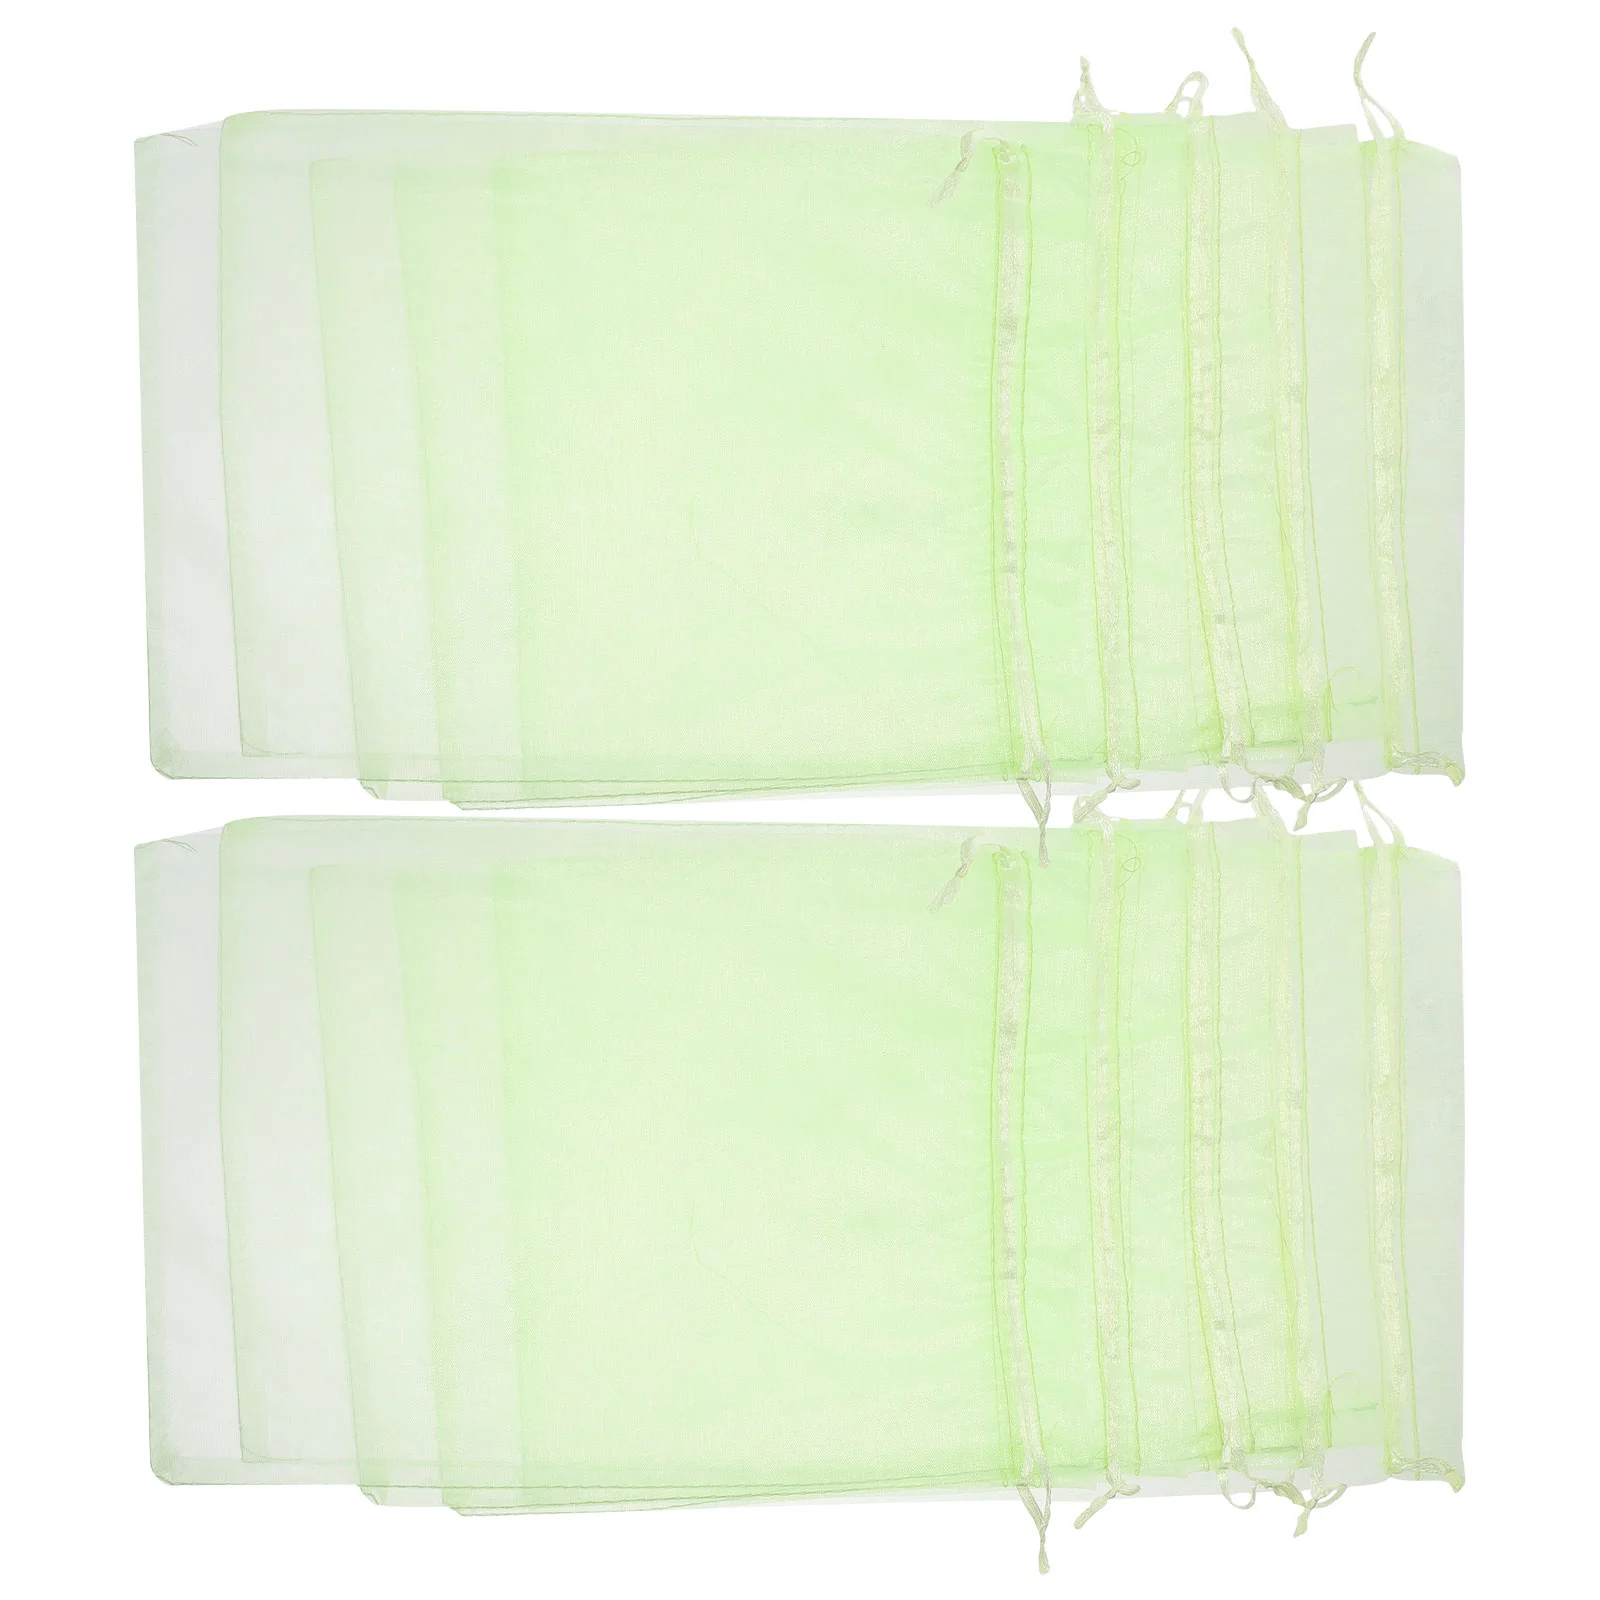 

50 Pcs Fruit Protection Bag Pouches Barrier Net Bags Vegetables Green Plants Trees Garden Netting Strawberry Fruits &